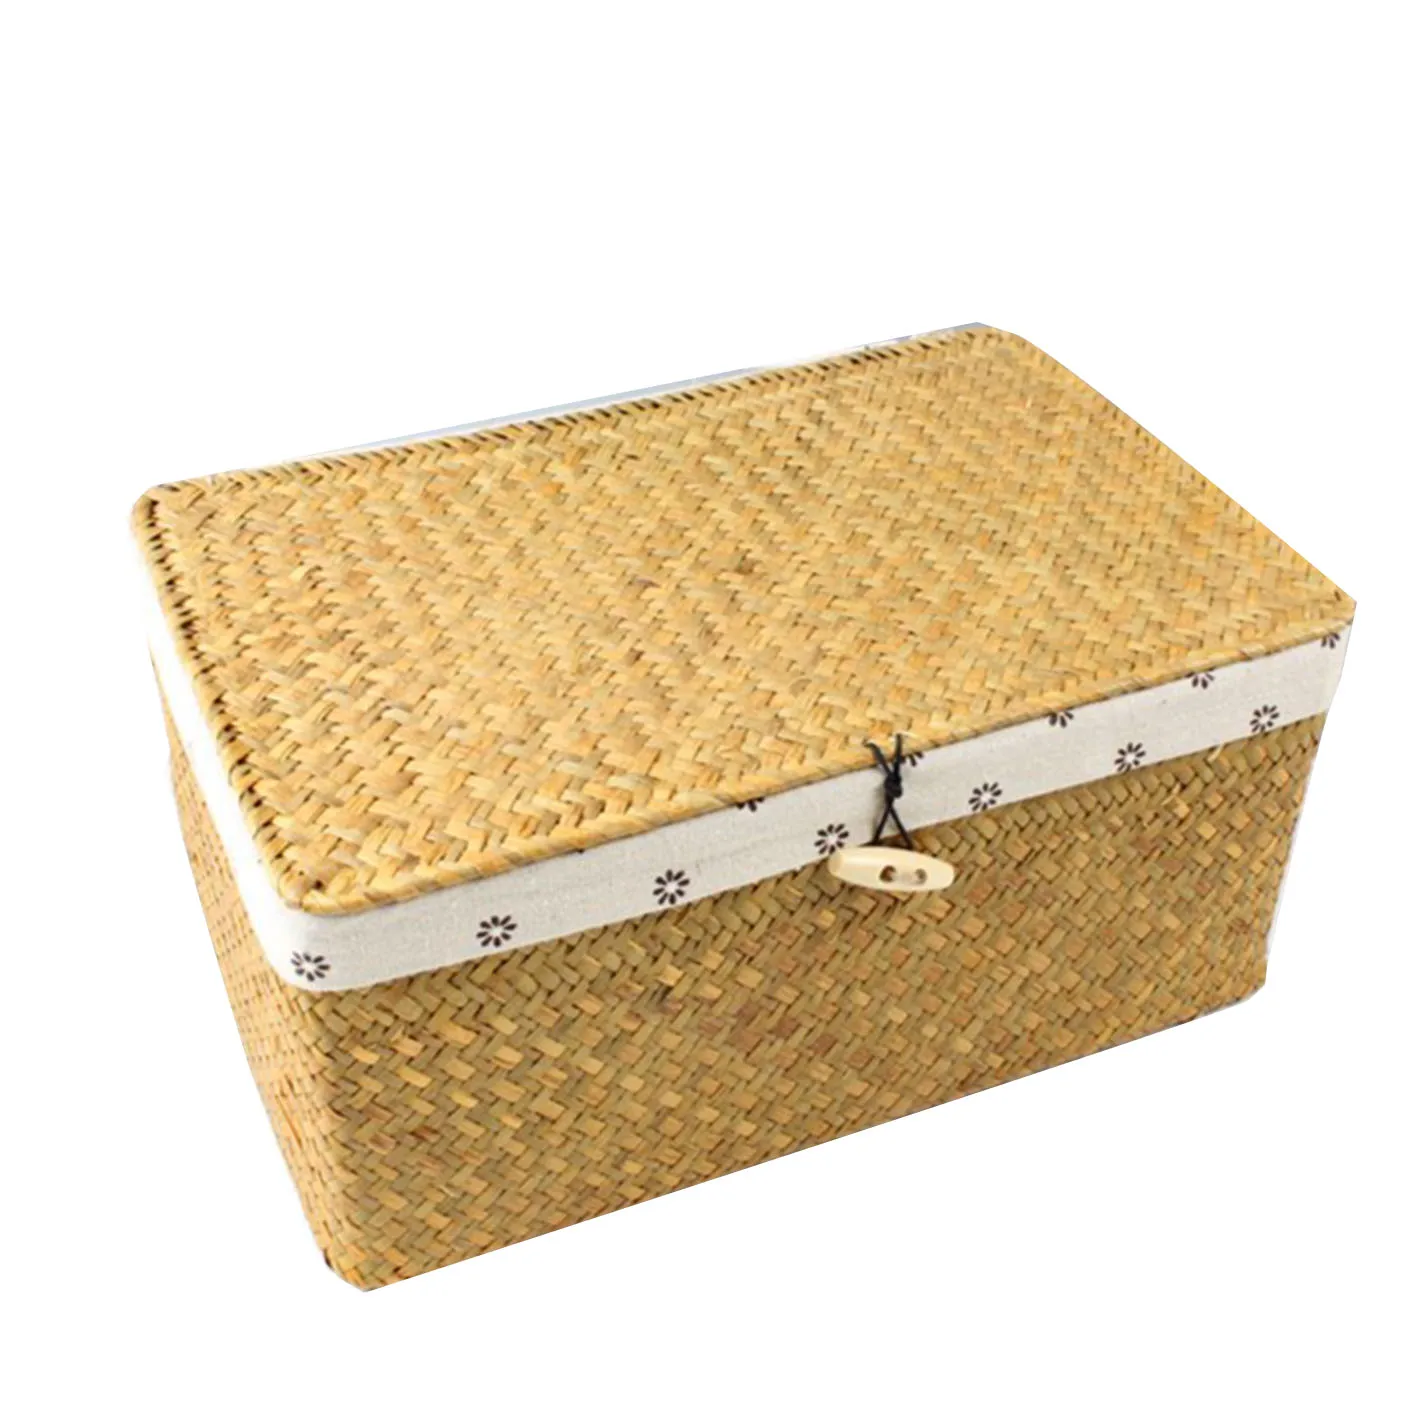 

With lining storage basket straw with a cover inside the three compartment storage box